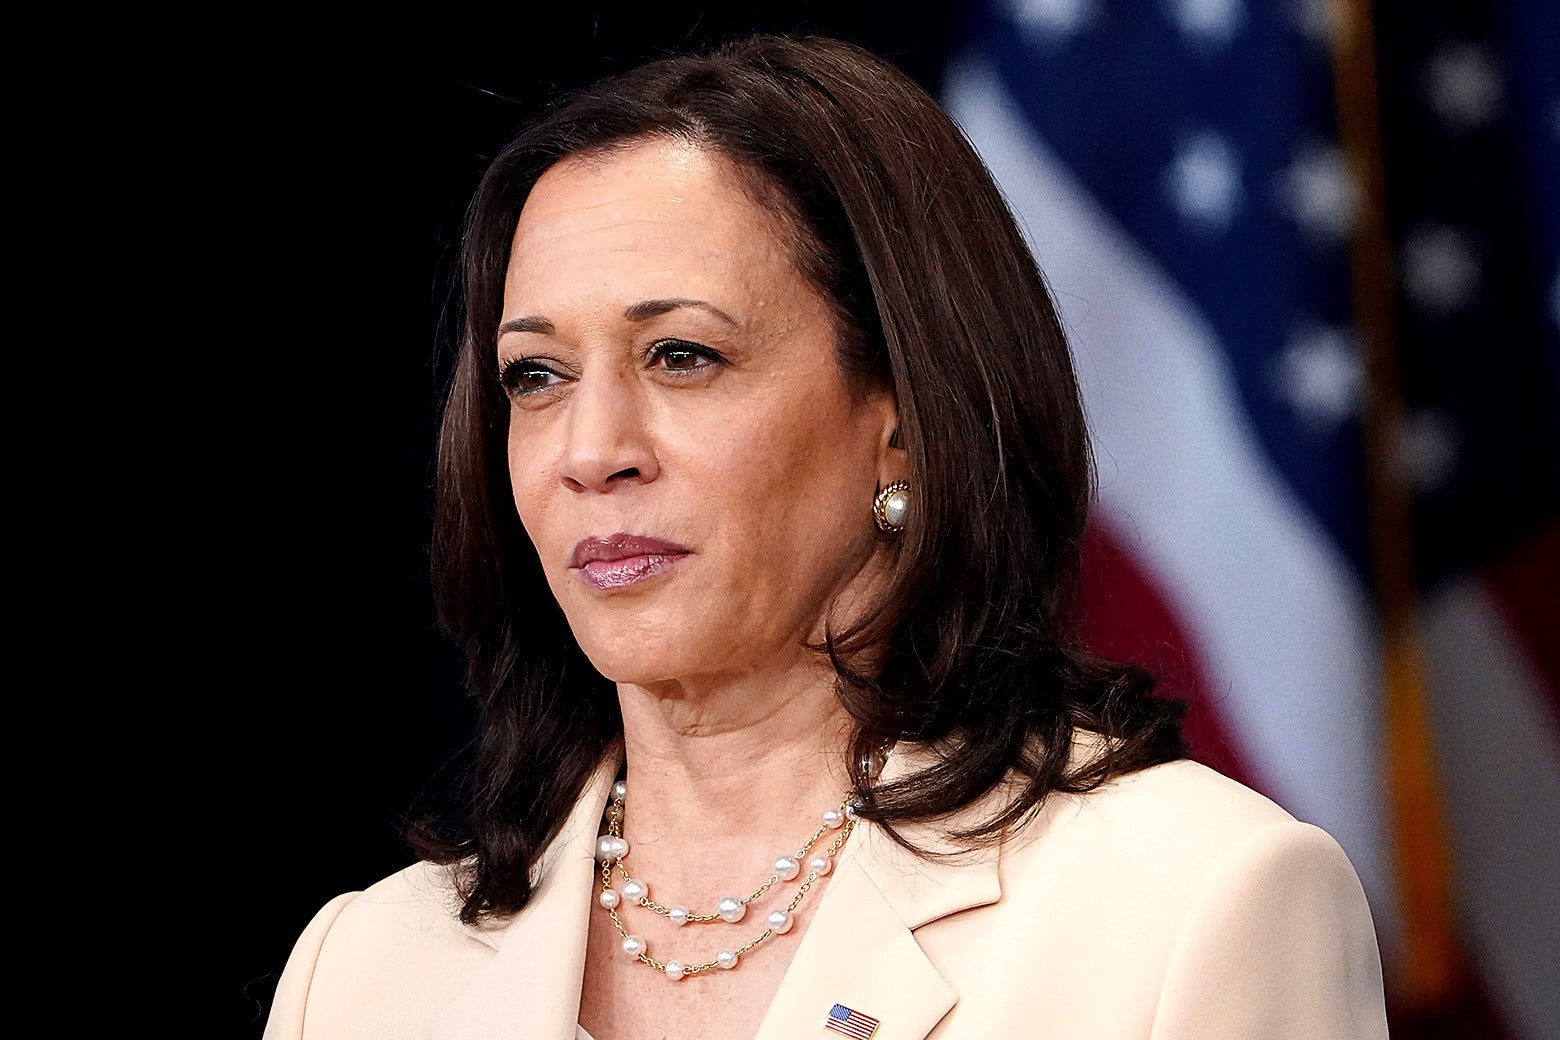 Kamala Harris staring with a concerned look.